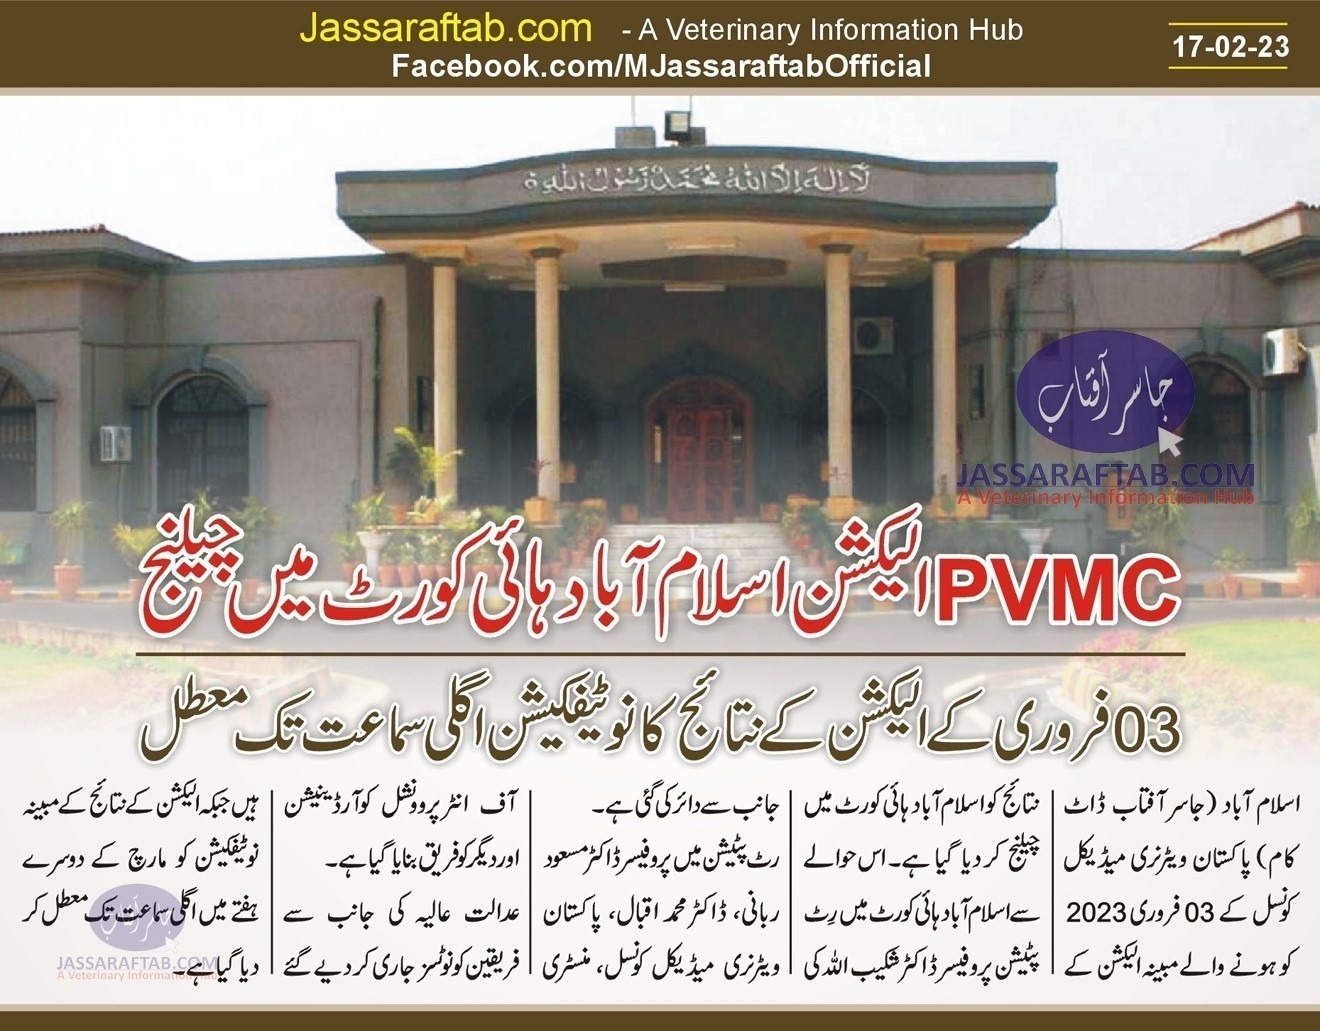 PVMC Election challanged in IHC